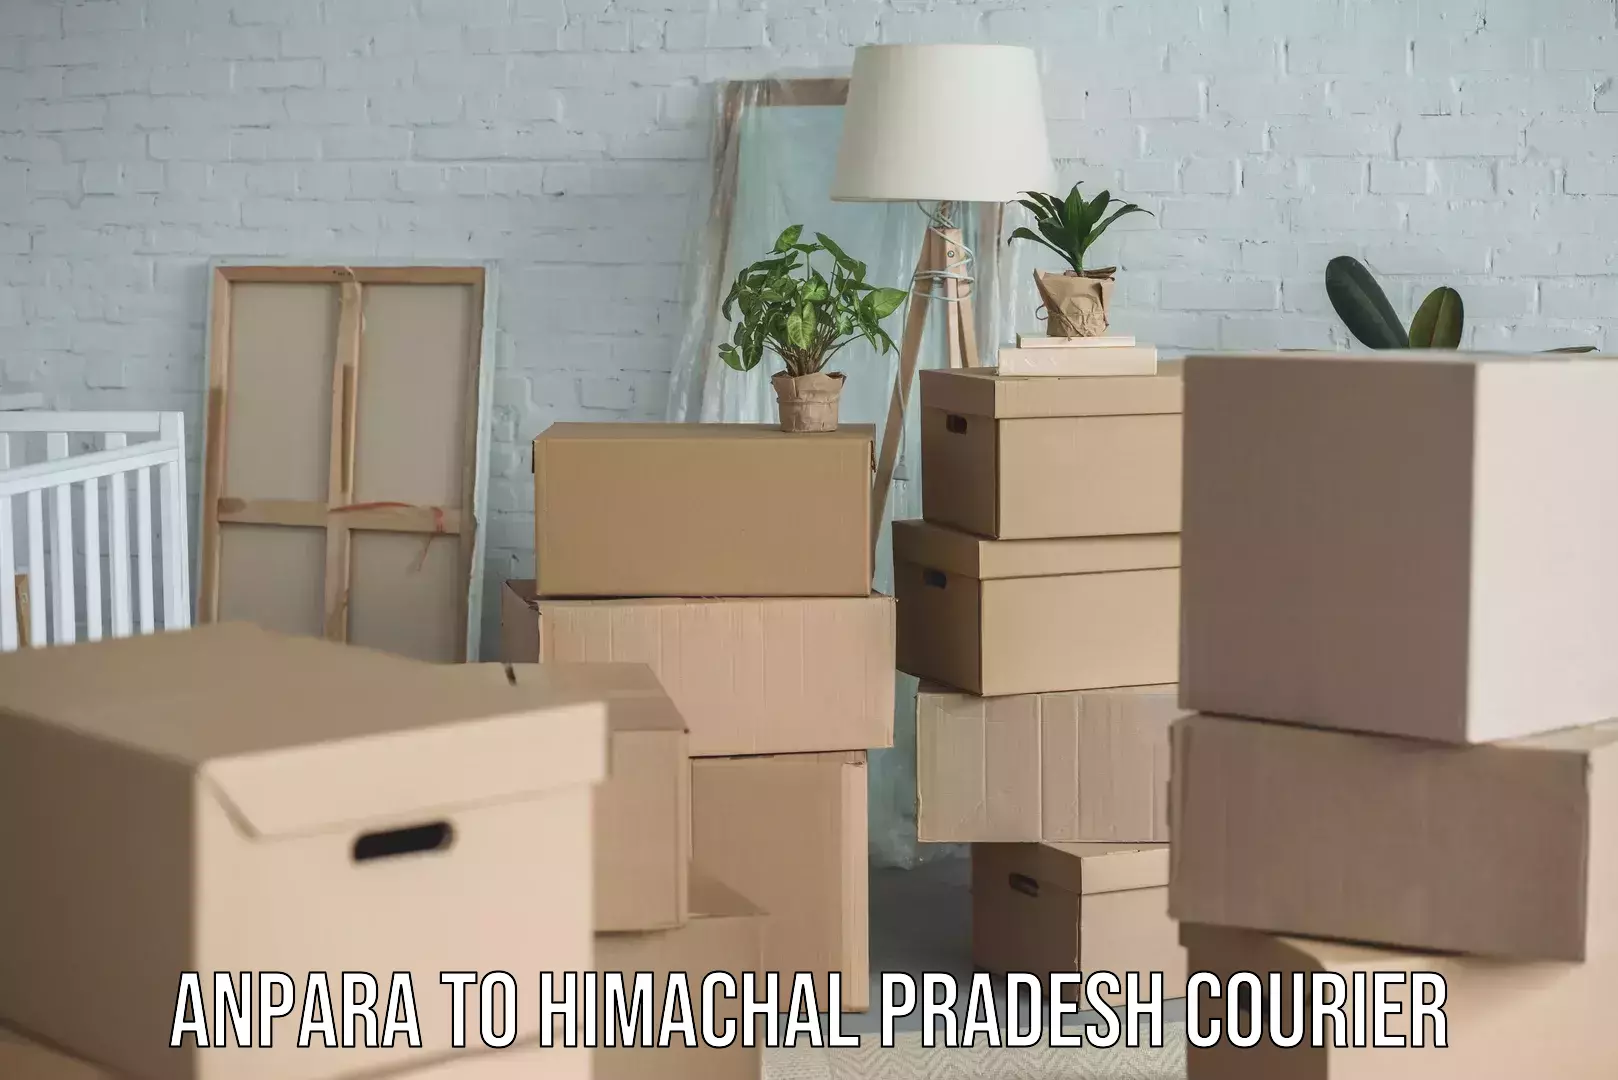 State-of-the-art courier technology Anpara to Himachal Pradesh